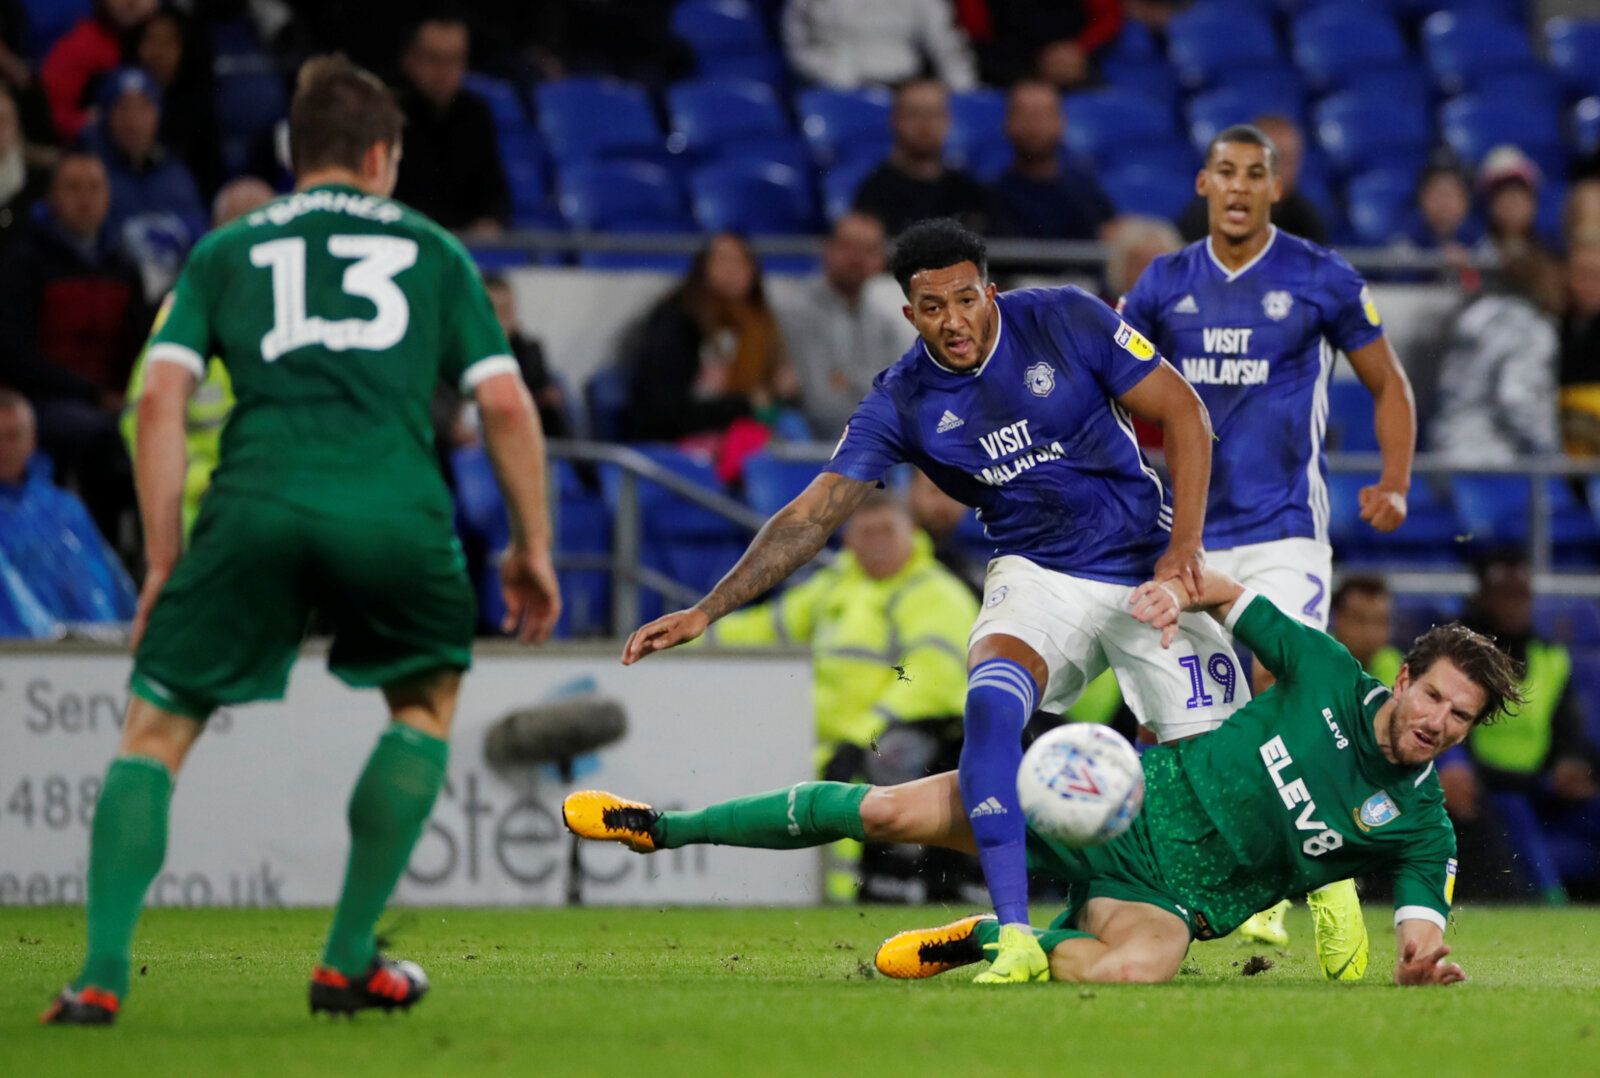 Soccer Football - Championship - Cardiff City v Sheffield Wednesday - Cardiff City Stadium, Cardiff, Britain - October 18, 2019   Sheffield Wednesday's Sam Hutchinson and Cardiff City's Nathaniel Mendez-Laing in action   Action Images/Paul Childs    EDITORIAL USE ONLY. No use with unauthorized audio, video, data, fixture lists, club/league logos or 